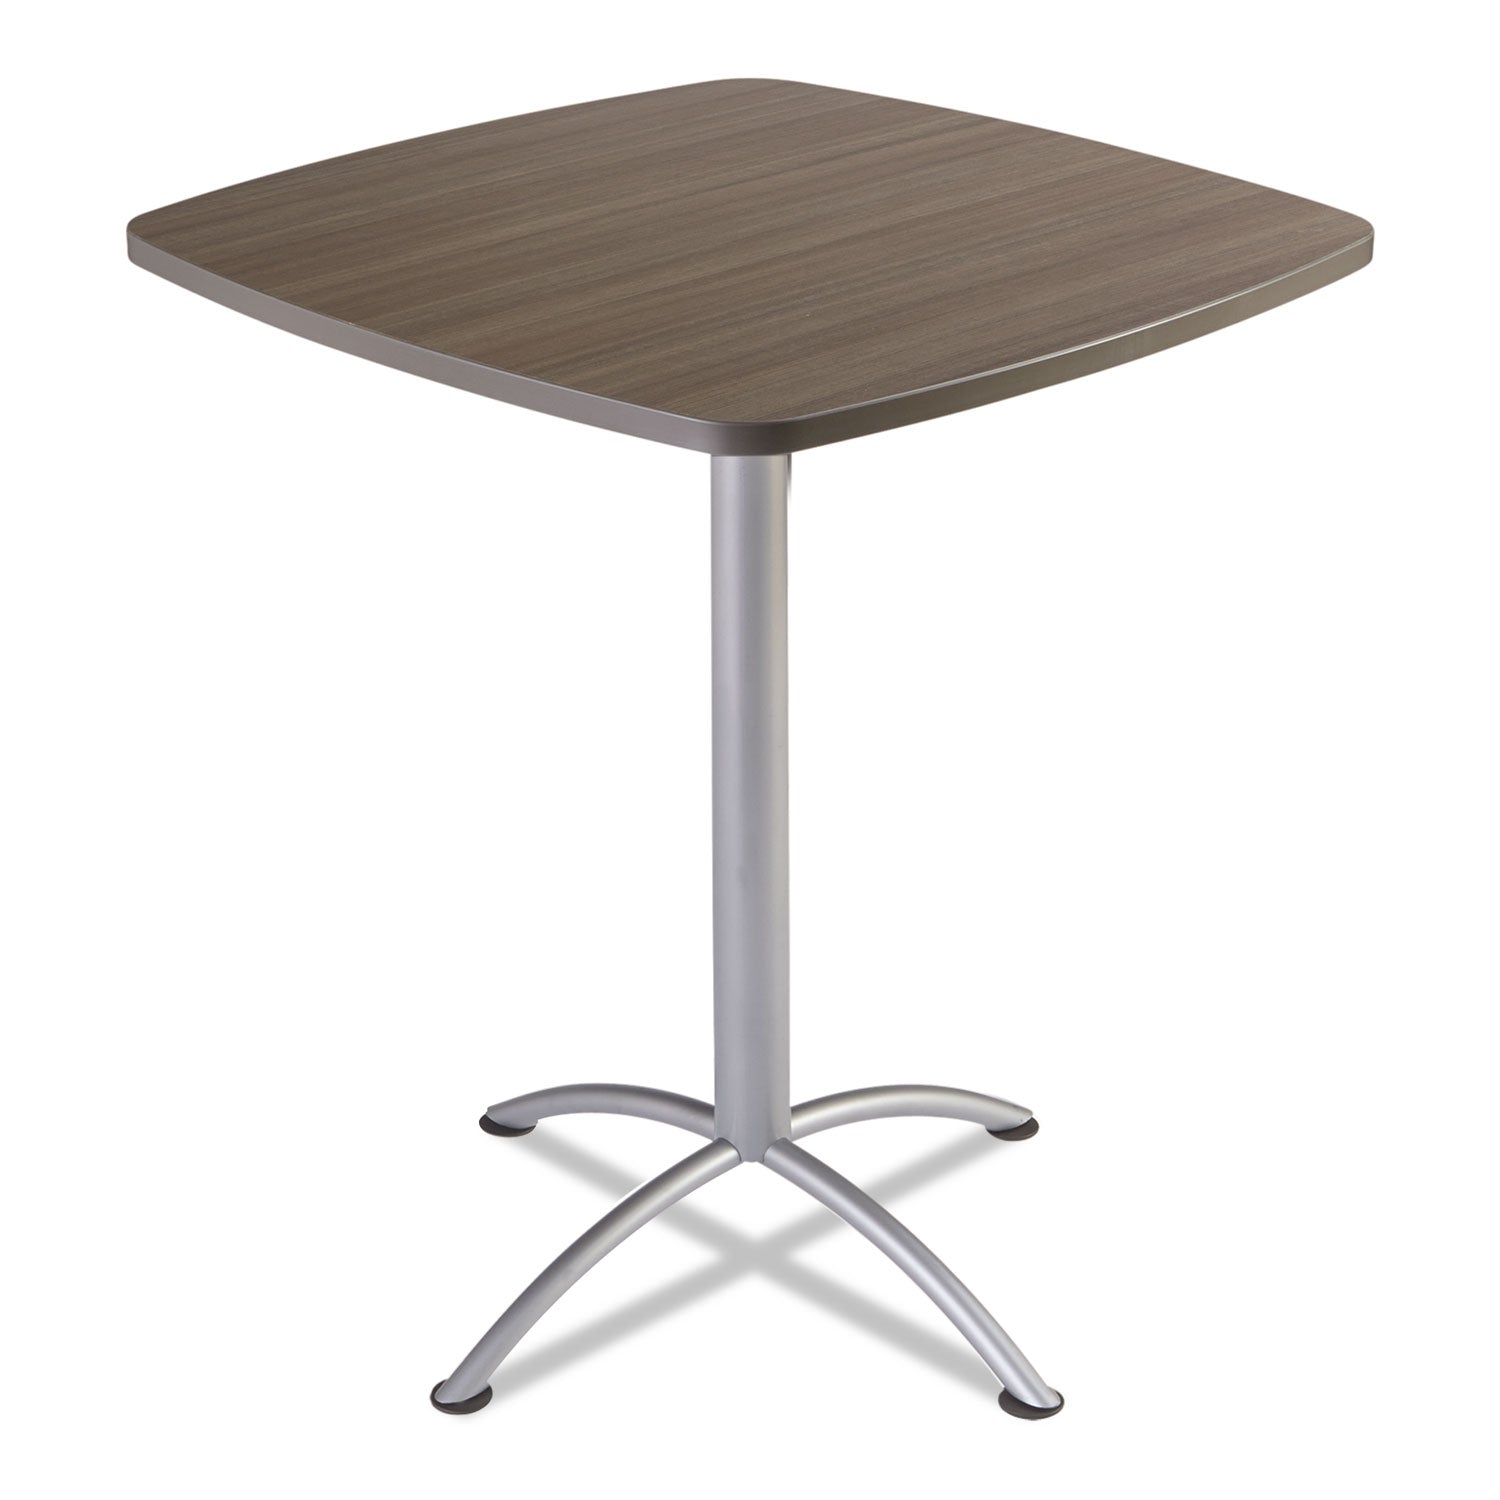 iLand Bistro-Height Table with Contoured Edges, Square, 36" x 36" x 42", Natural Teak Top, Silver Base - 